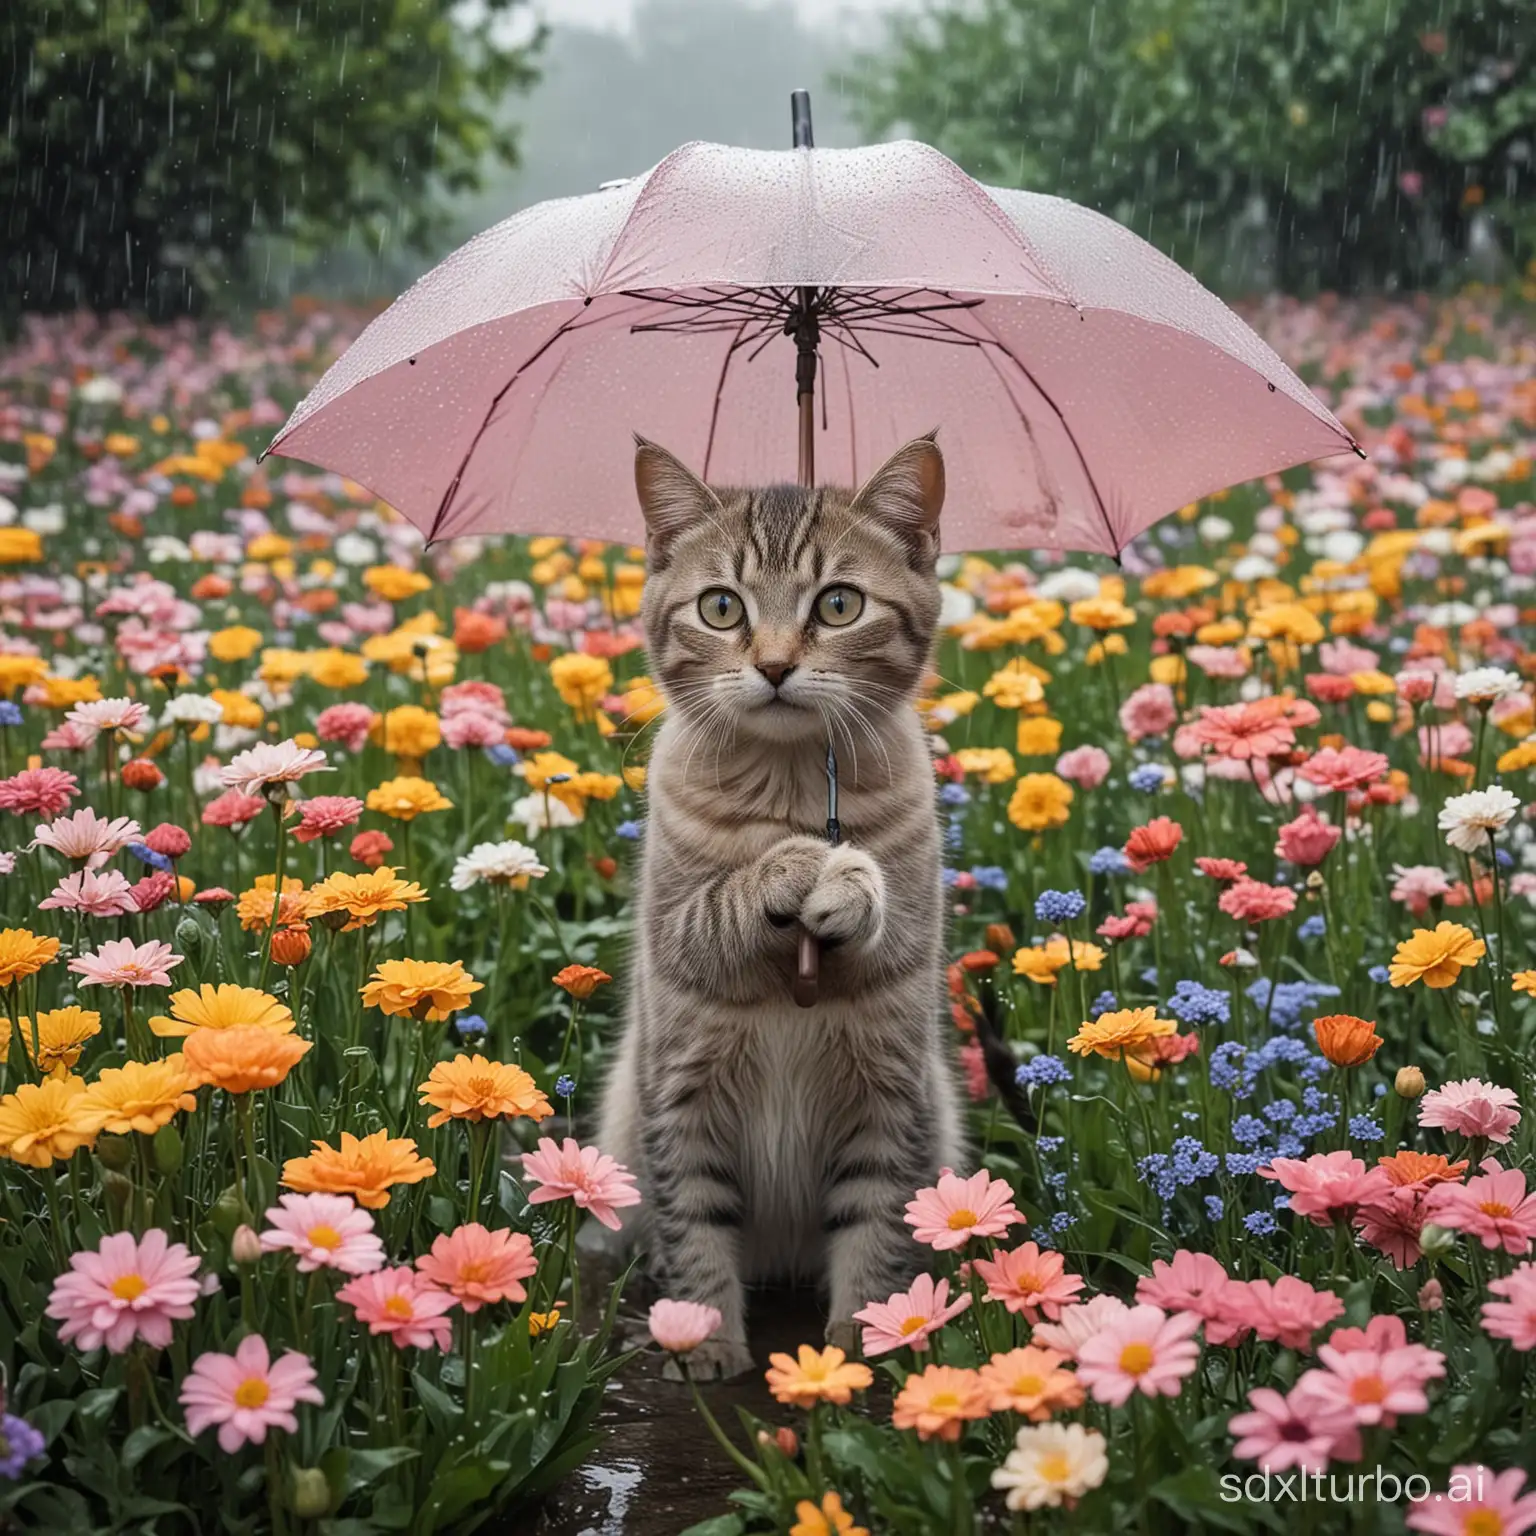 Cat-with-Umbrella-in-Flower-Field-on-Rainy-Day